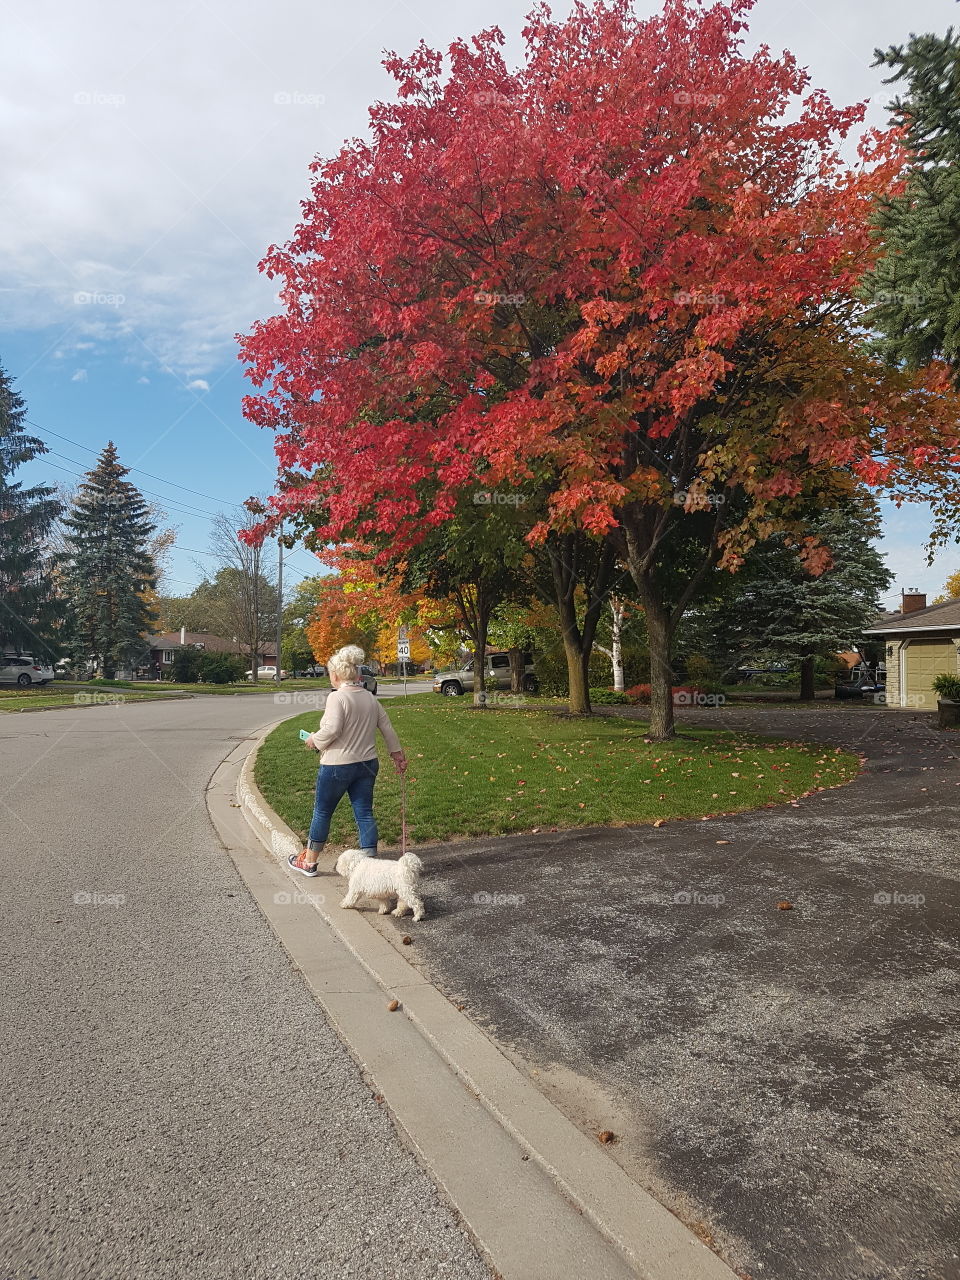 Woman walking a small white dog in Barrie, Ontario during a sunny, warm autumn afternoon.